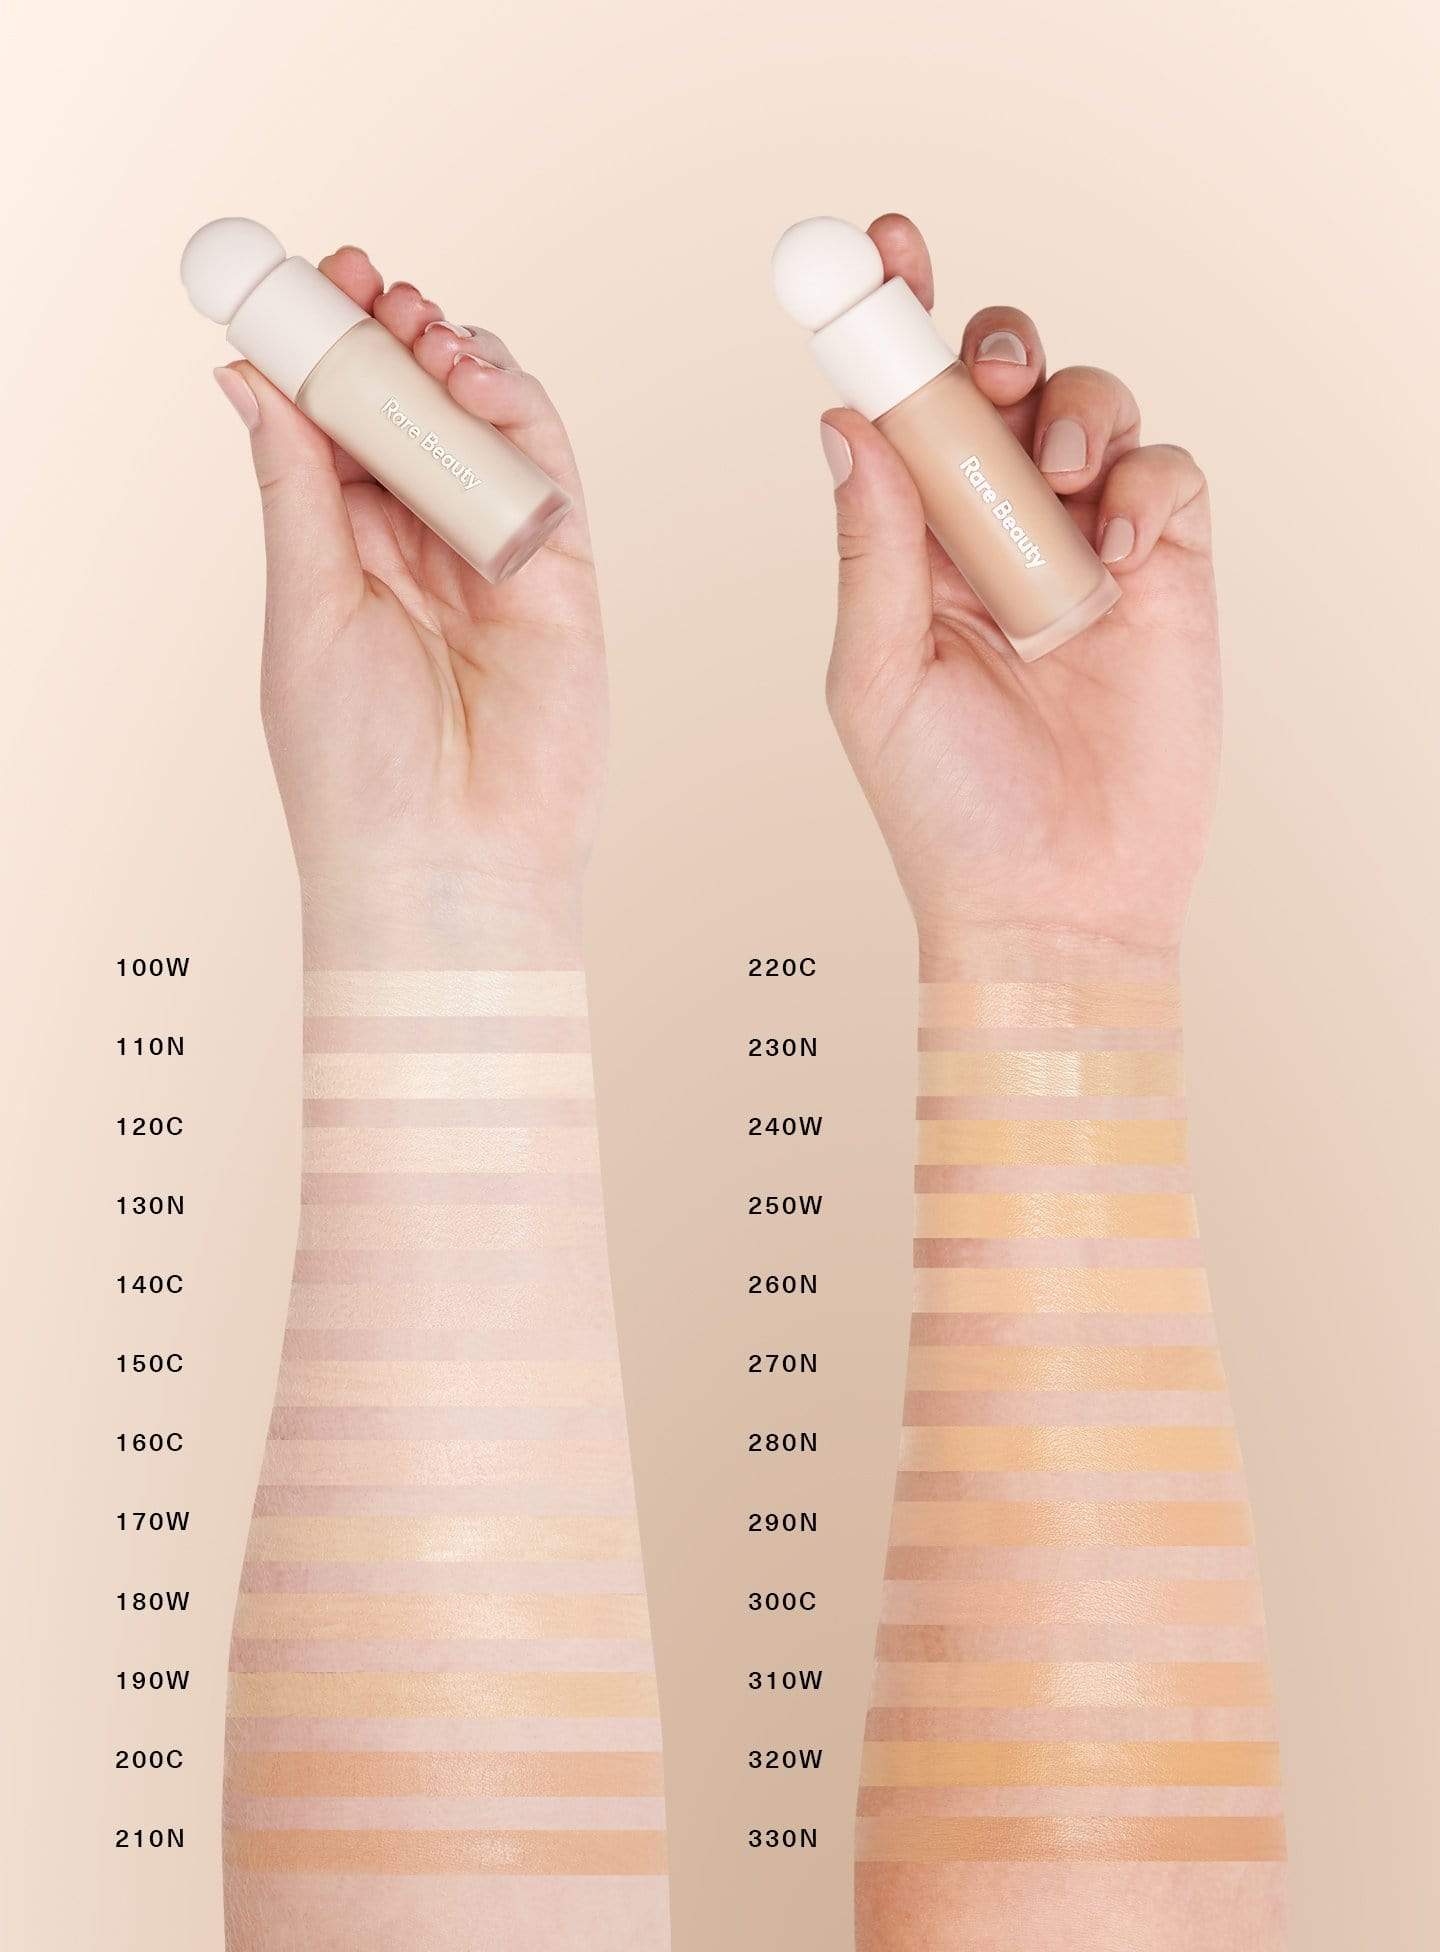 2020 Cruelty Free Concealer Guide + Swatches!